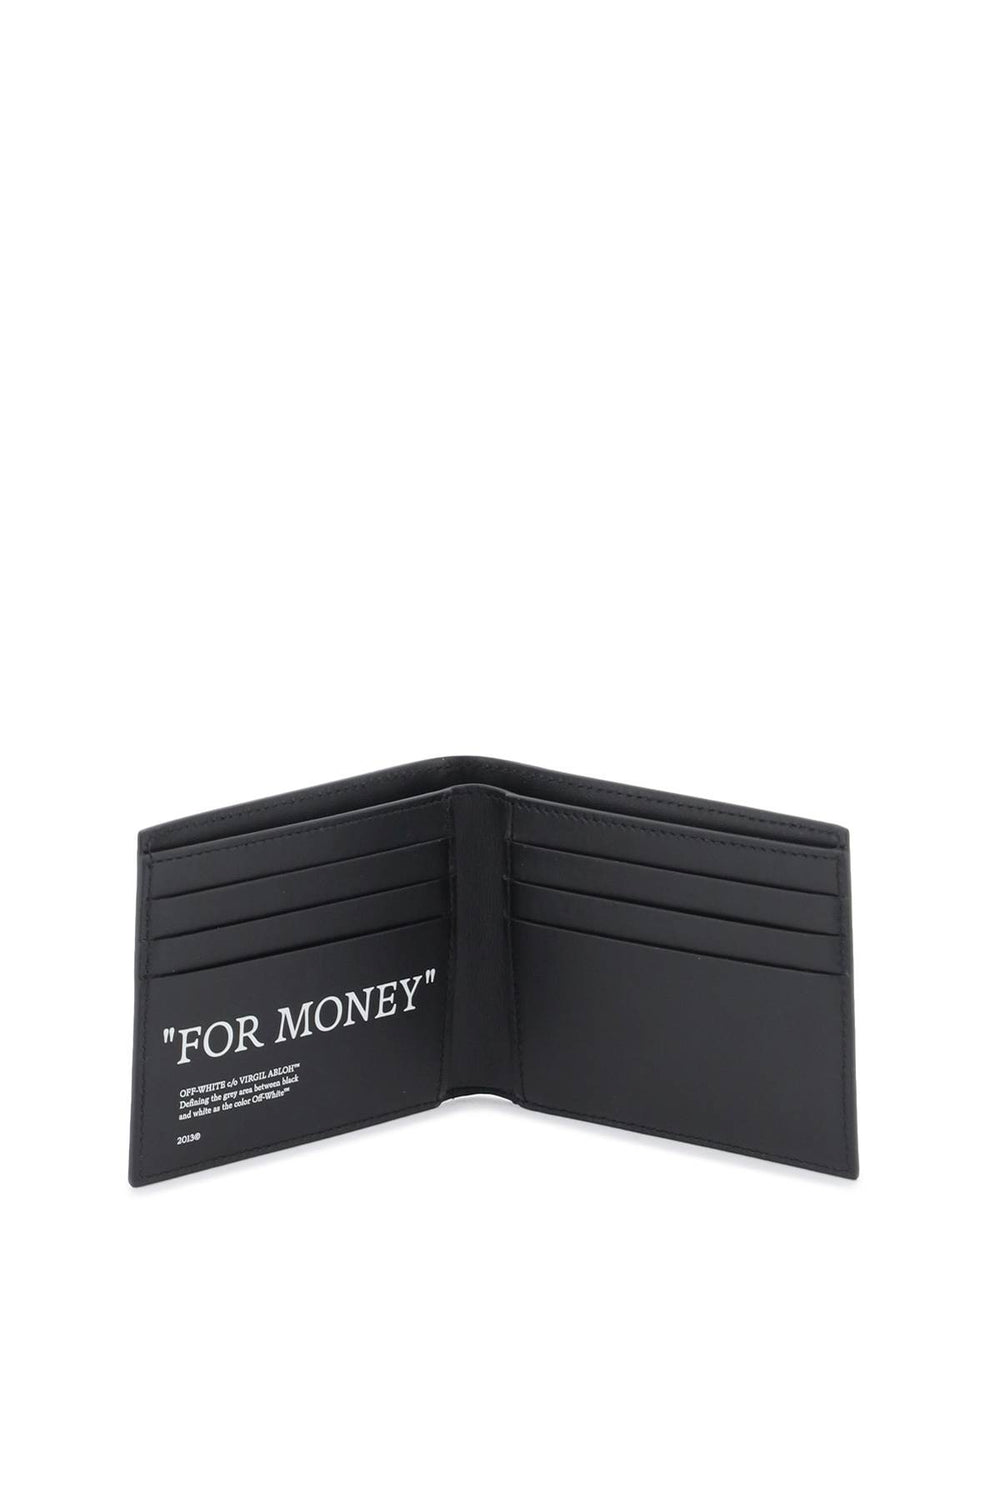 Off-white bookish bifold wallet-1